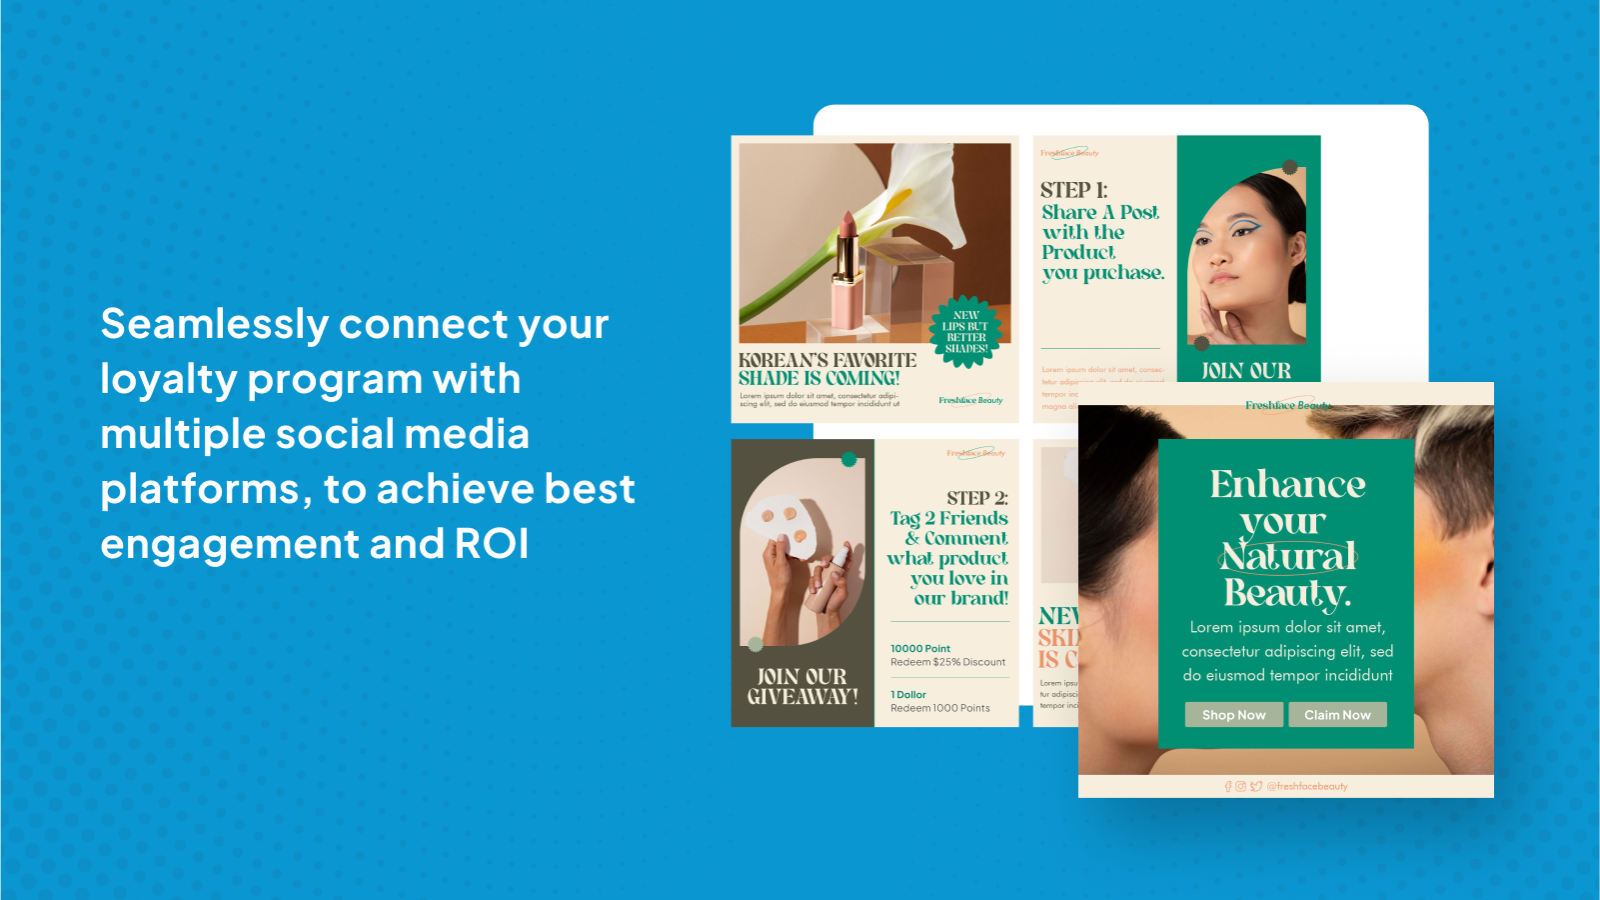 Seamlessly connect your loyalty program with multiple social